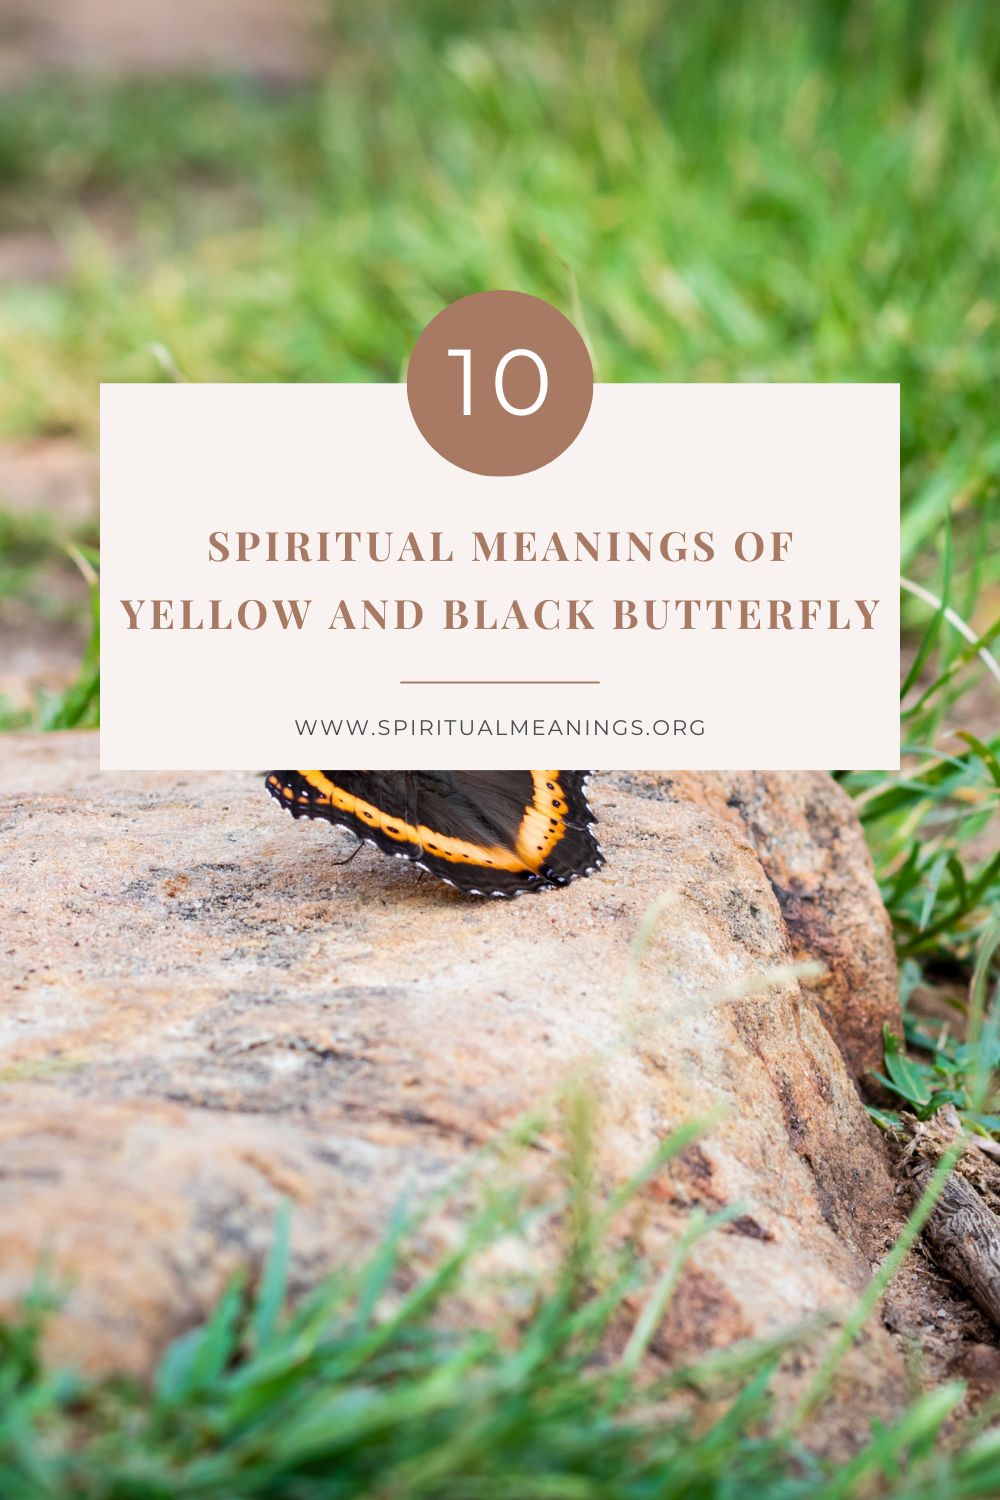 10 Spiritual Meanings of Yellow and Black Butterfly